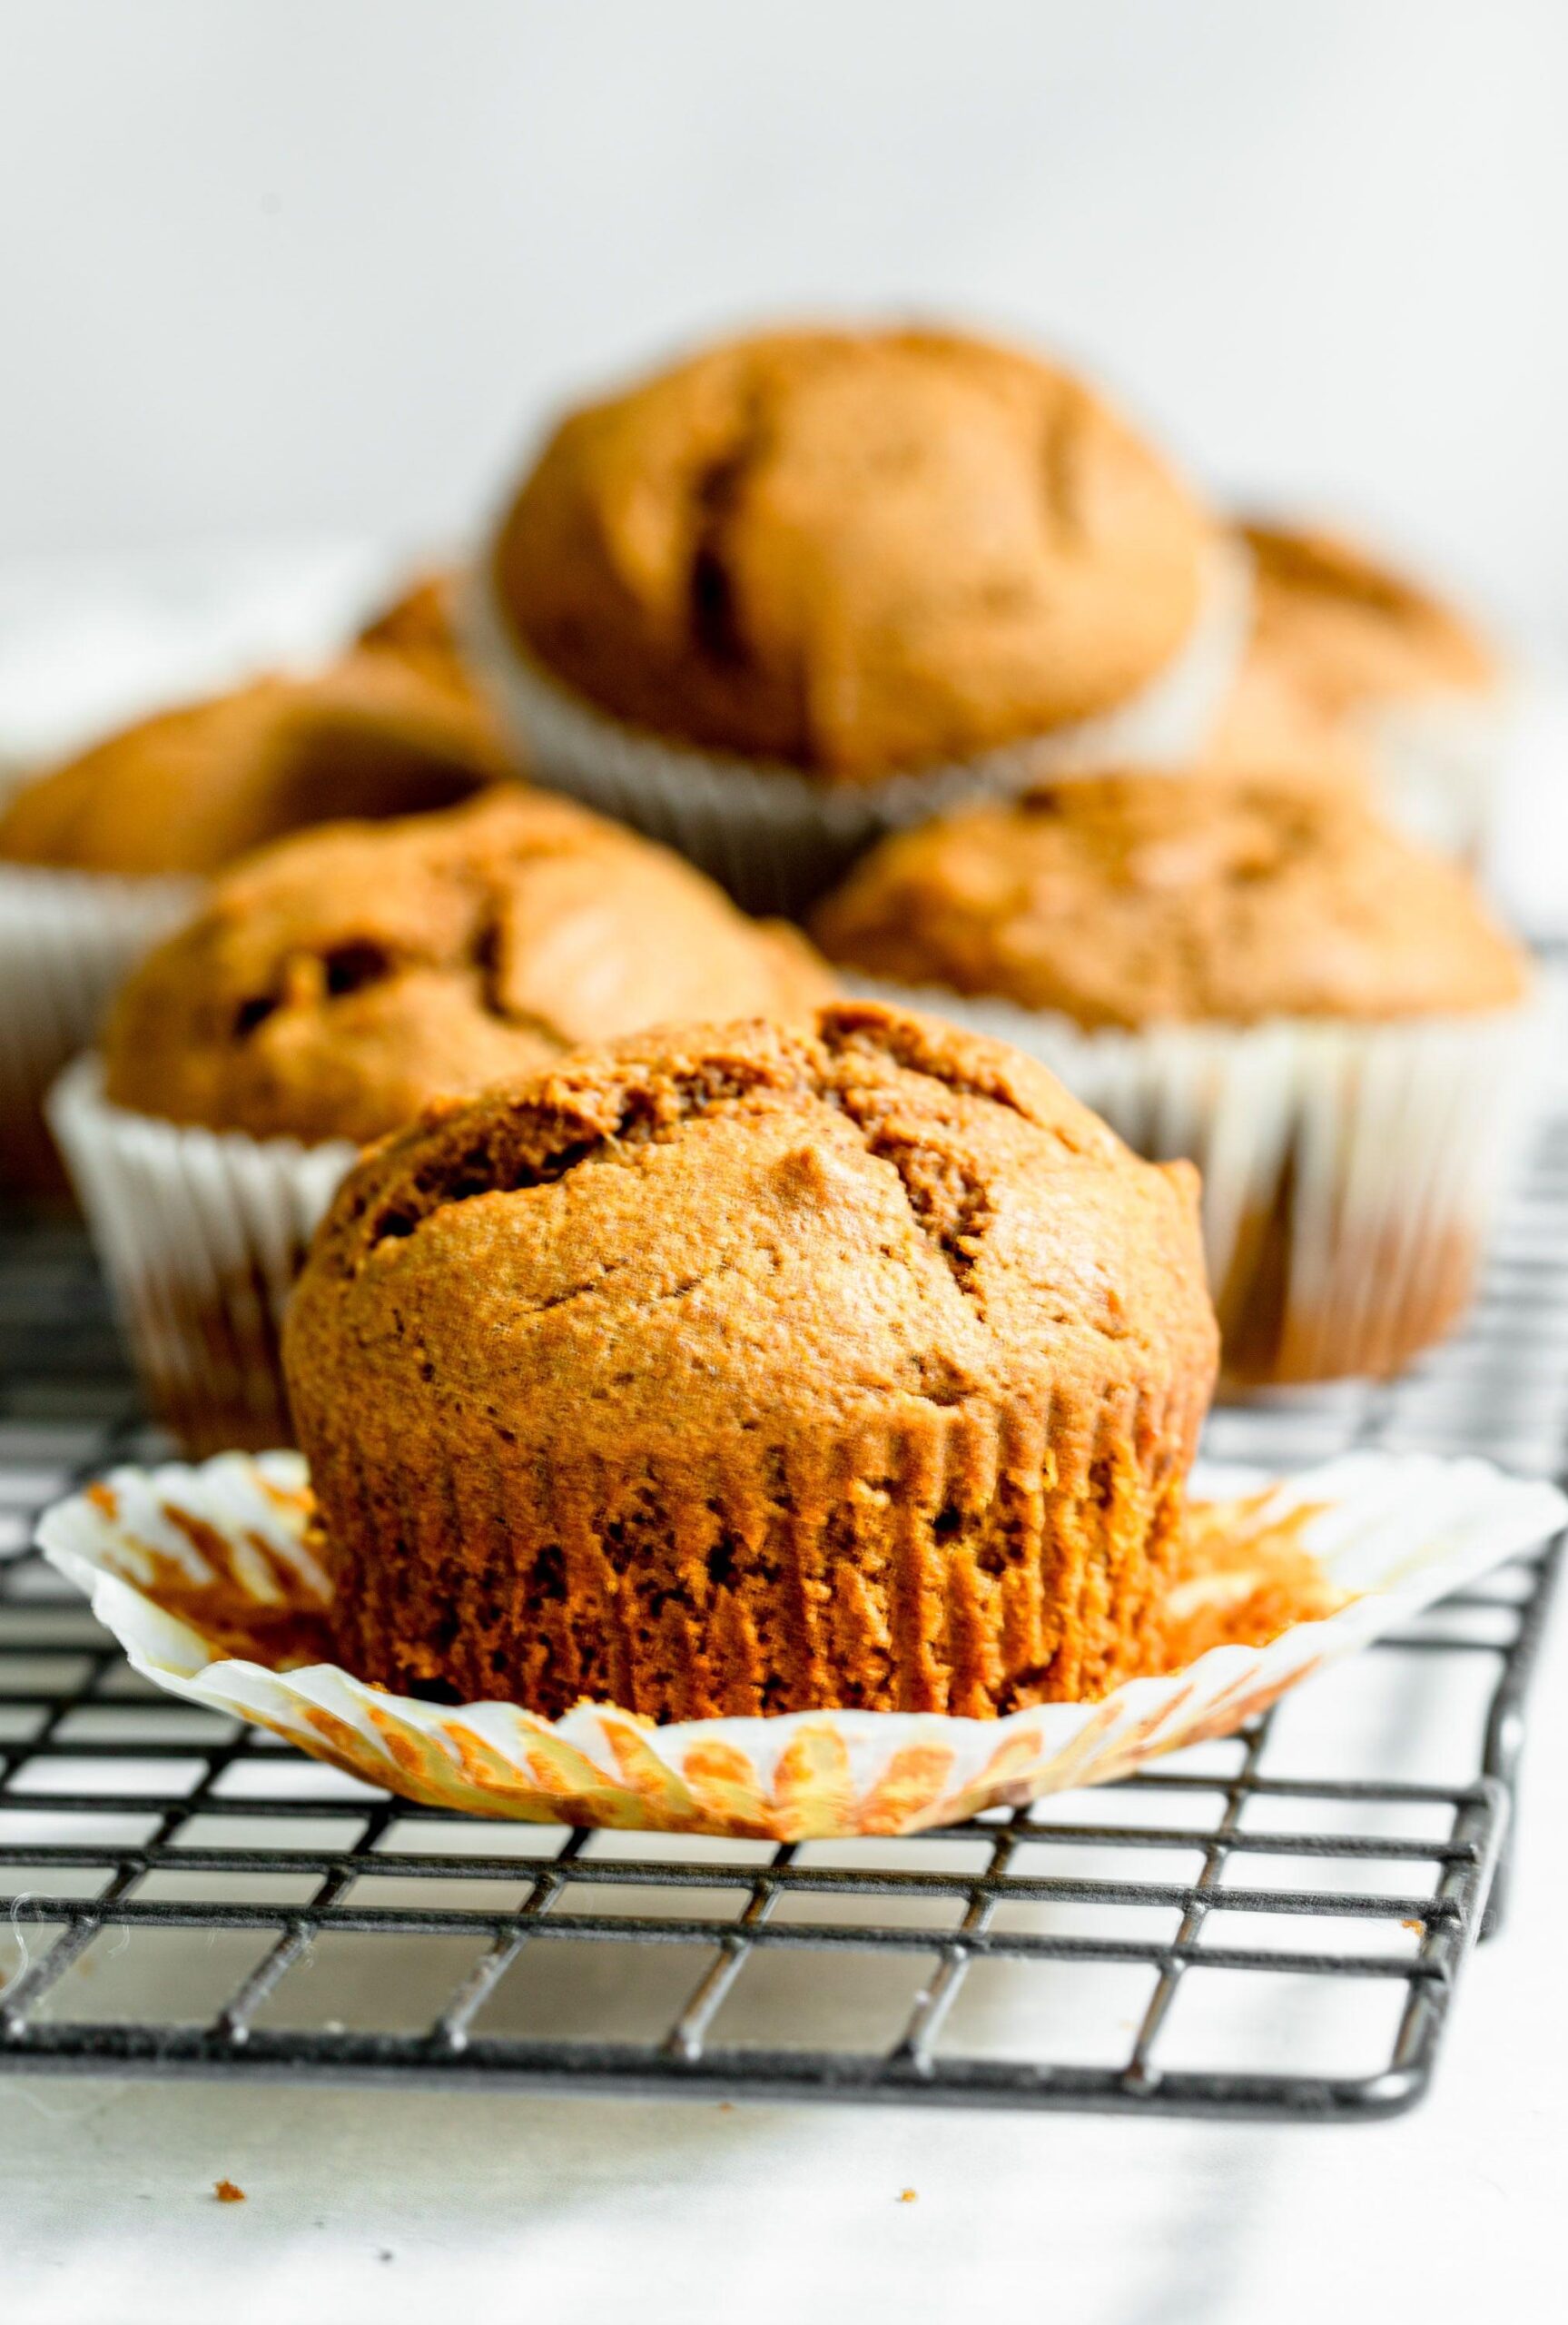  These whole wheat pumpkin muffins are moist and tender with a delicate pumpkin flavor